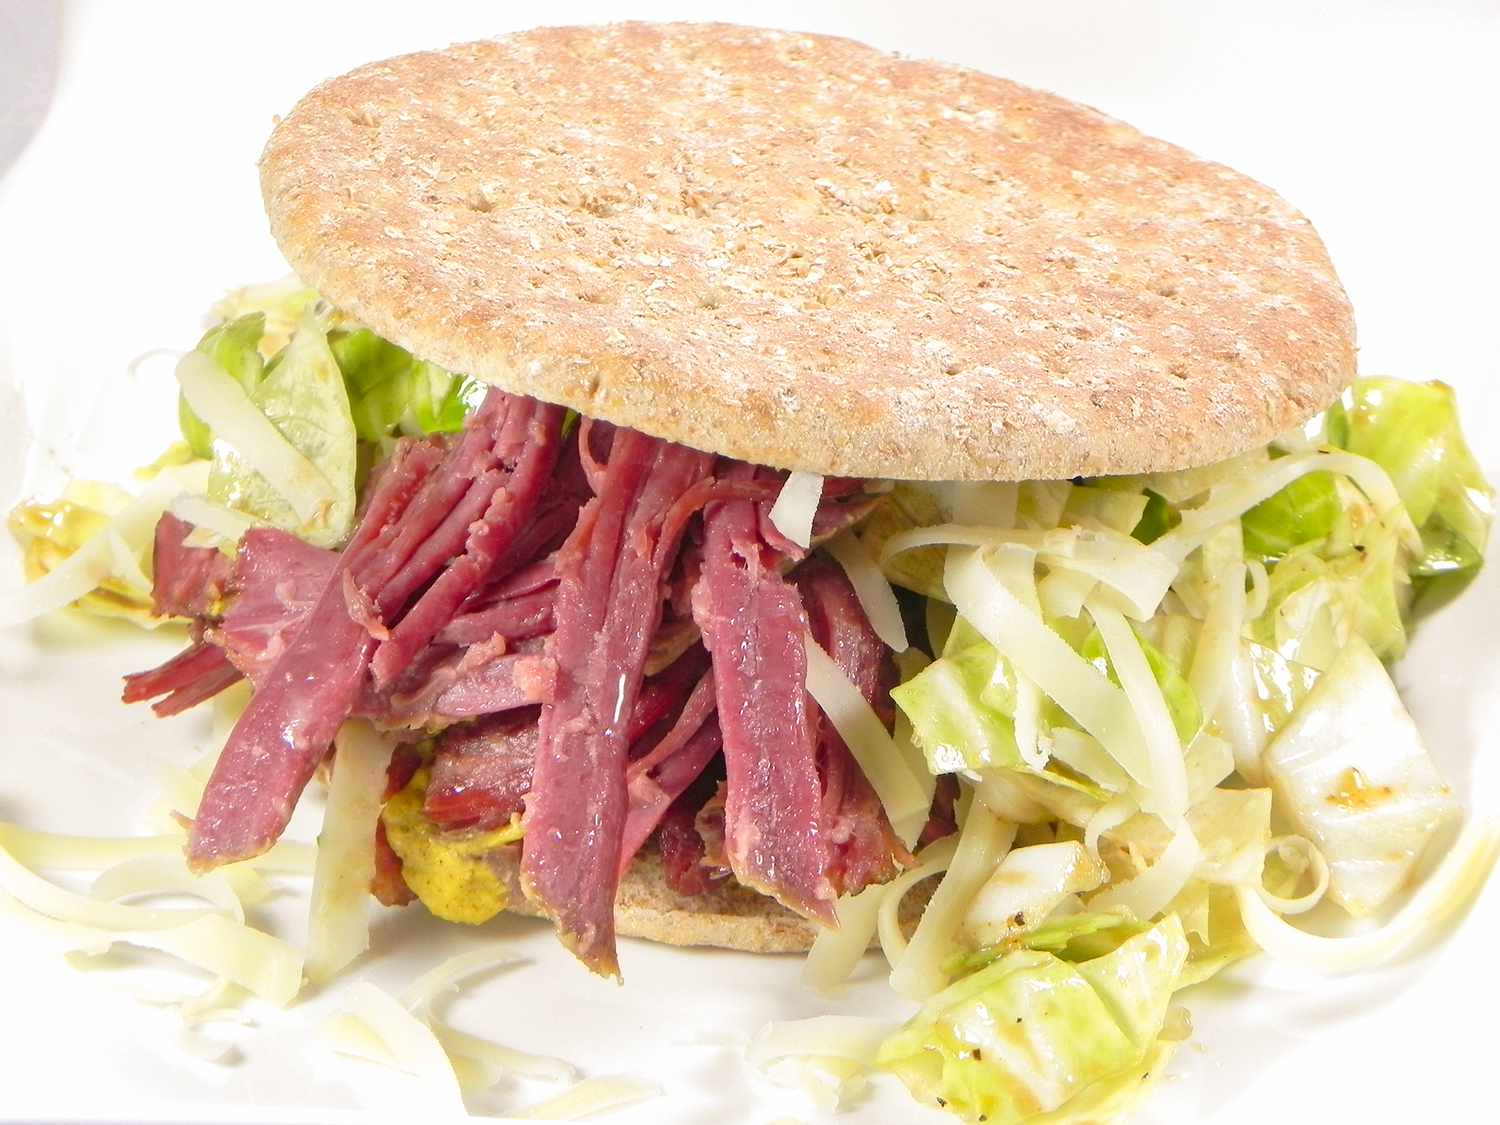 Close up view of an Irish Sandwich with corned beef brisket and lettuce